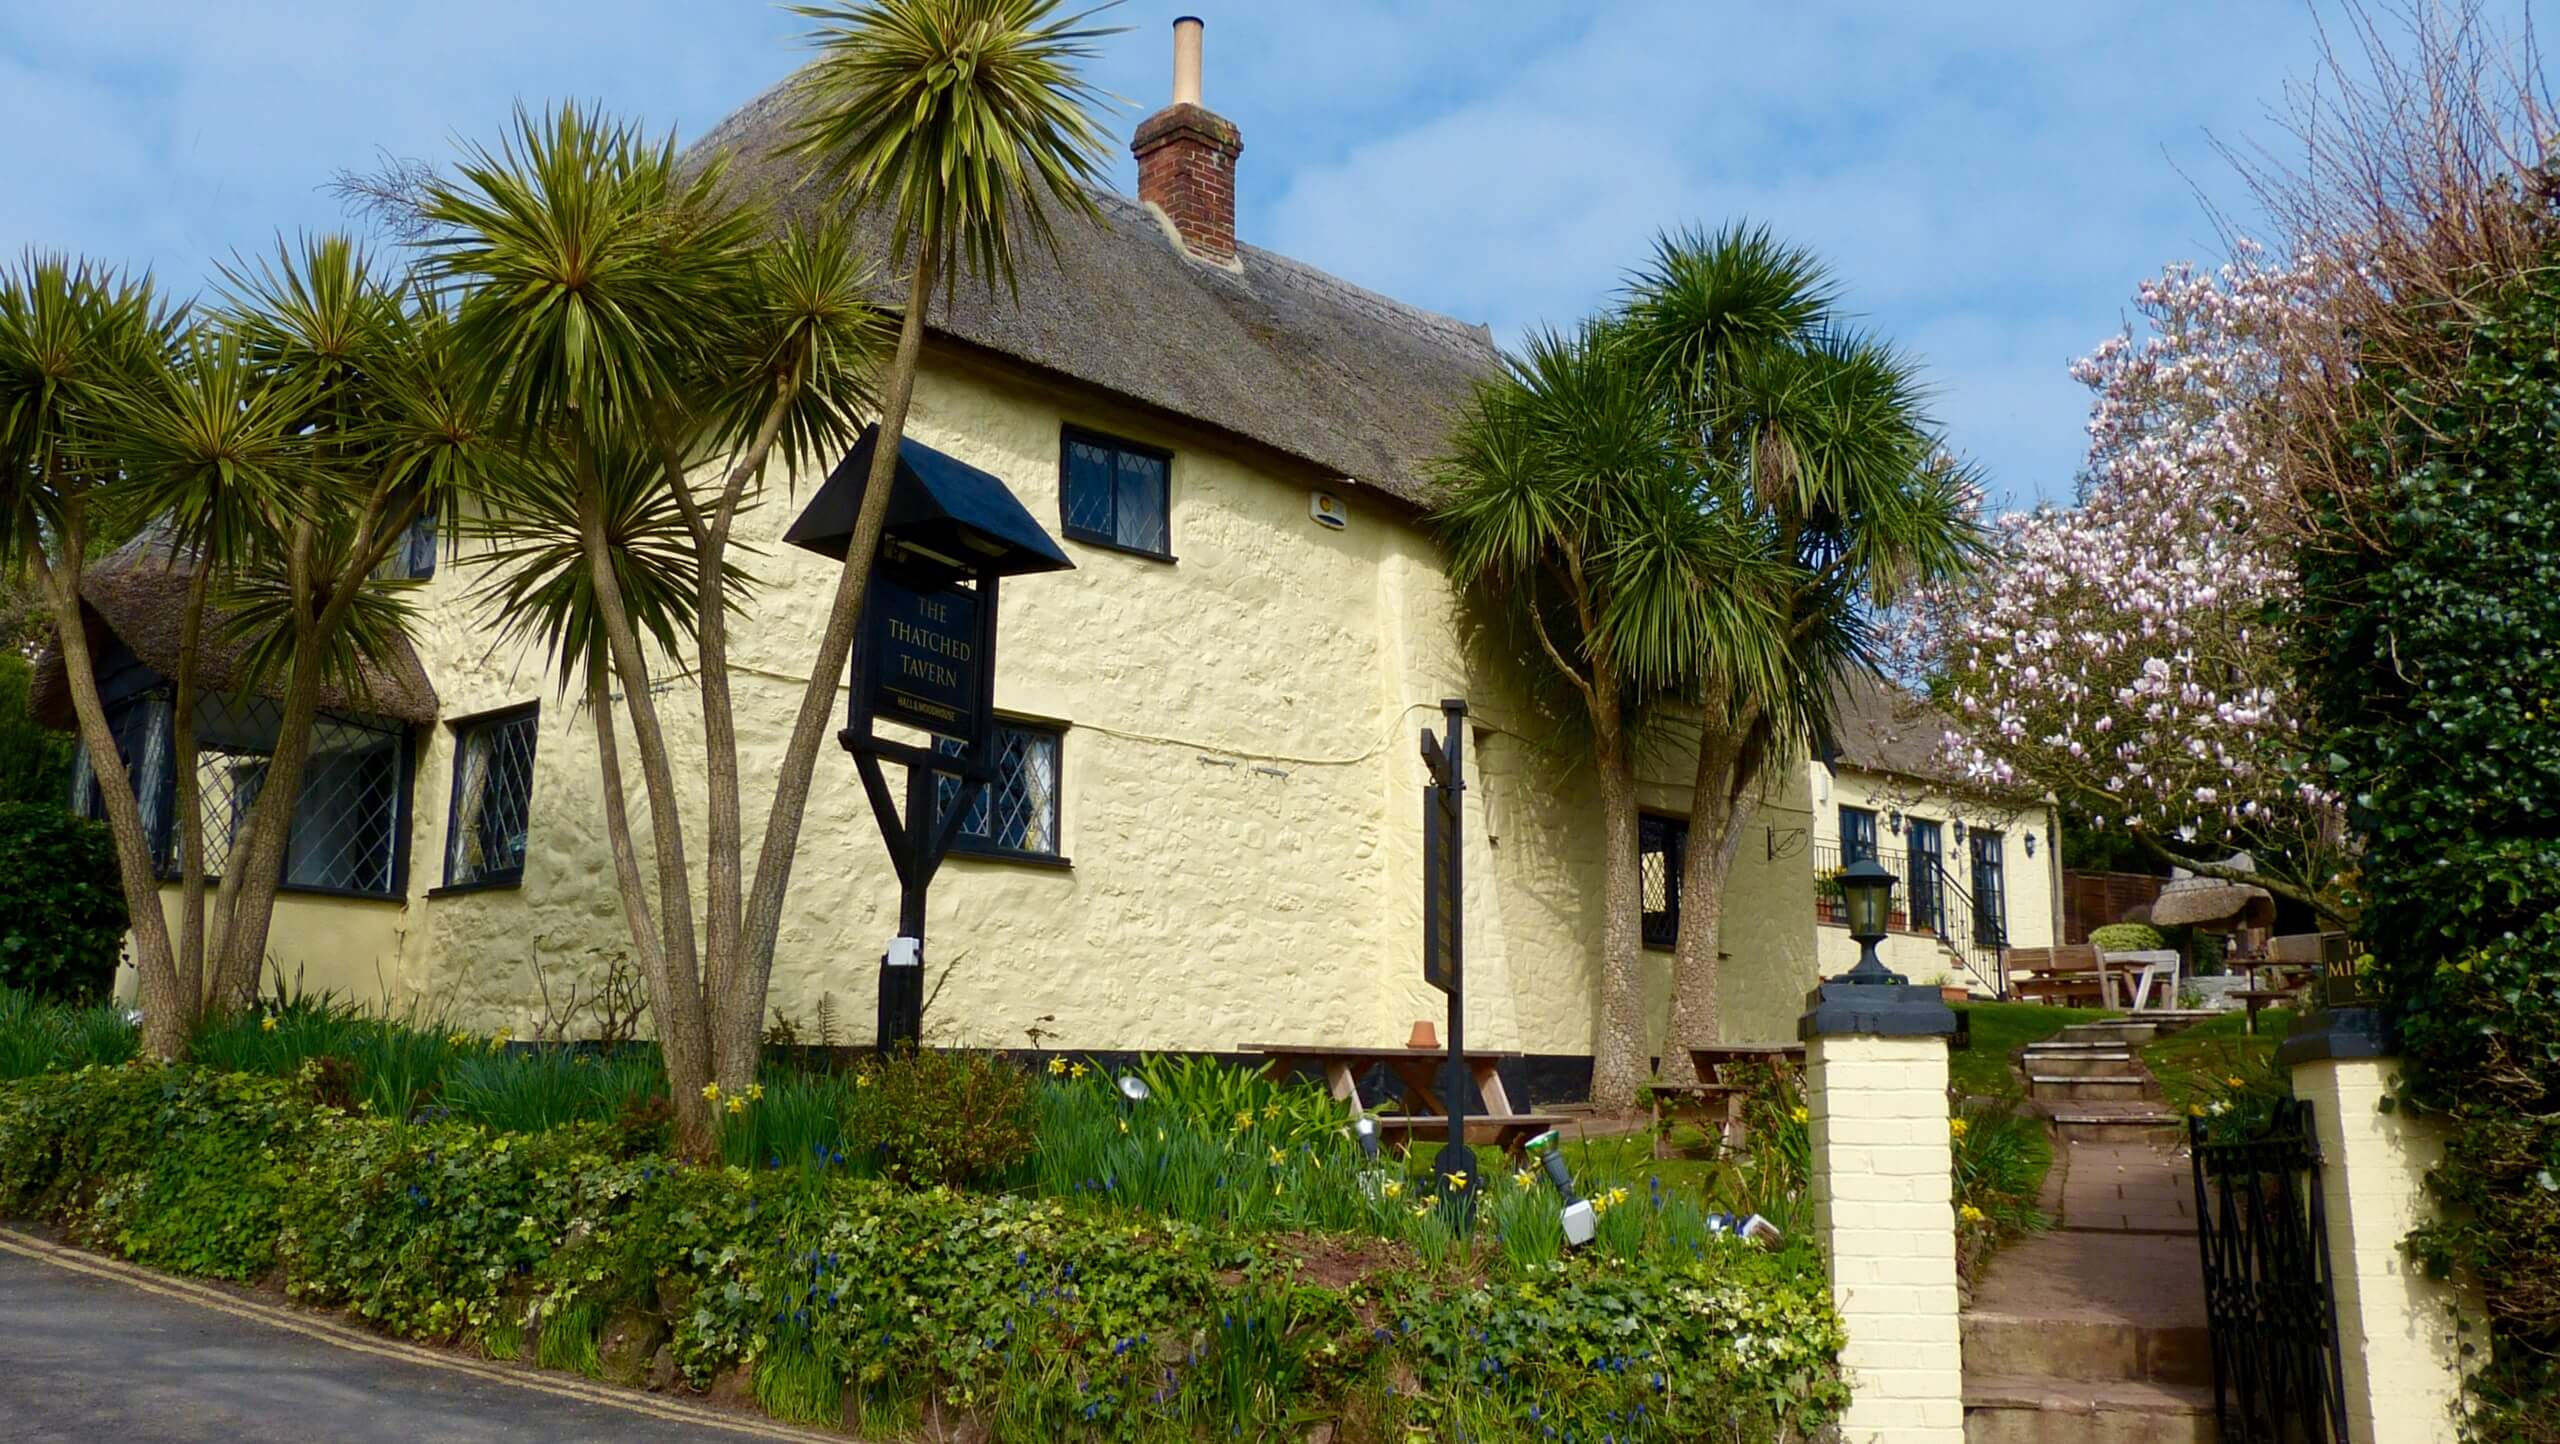 Thatched Tavern and South West Coast Path